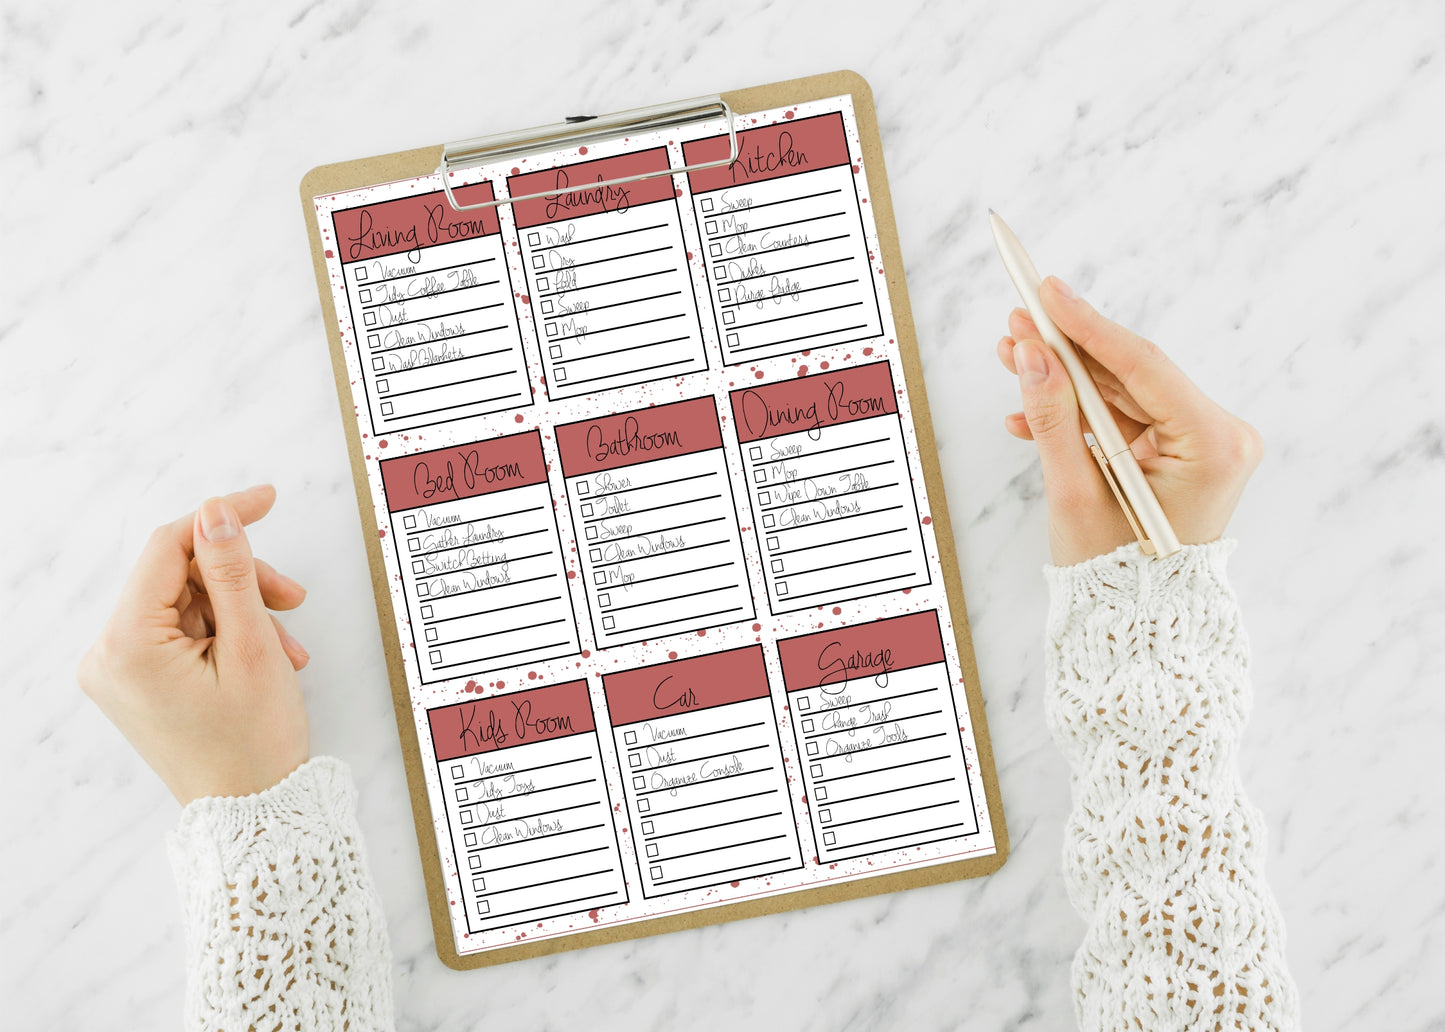 9 Section Checklist - To Do List - Chore List *DIGITAL DOWNLOAD*